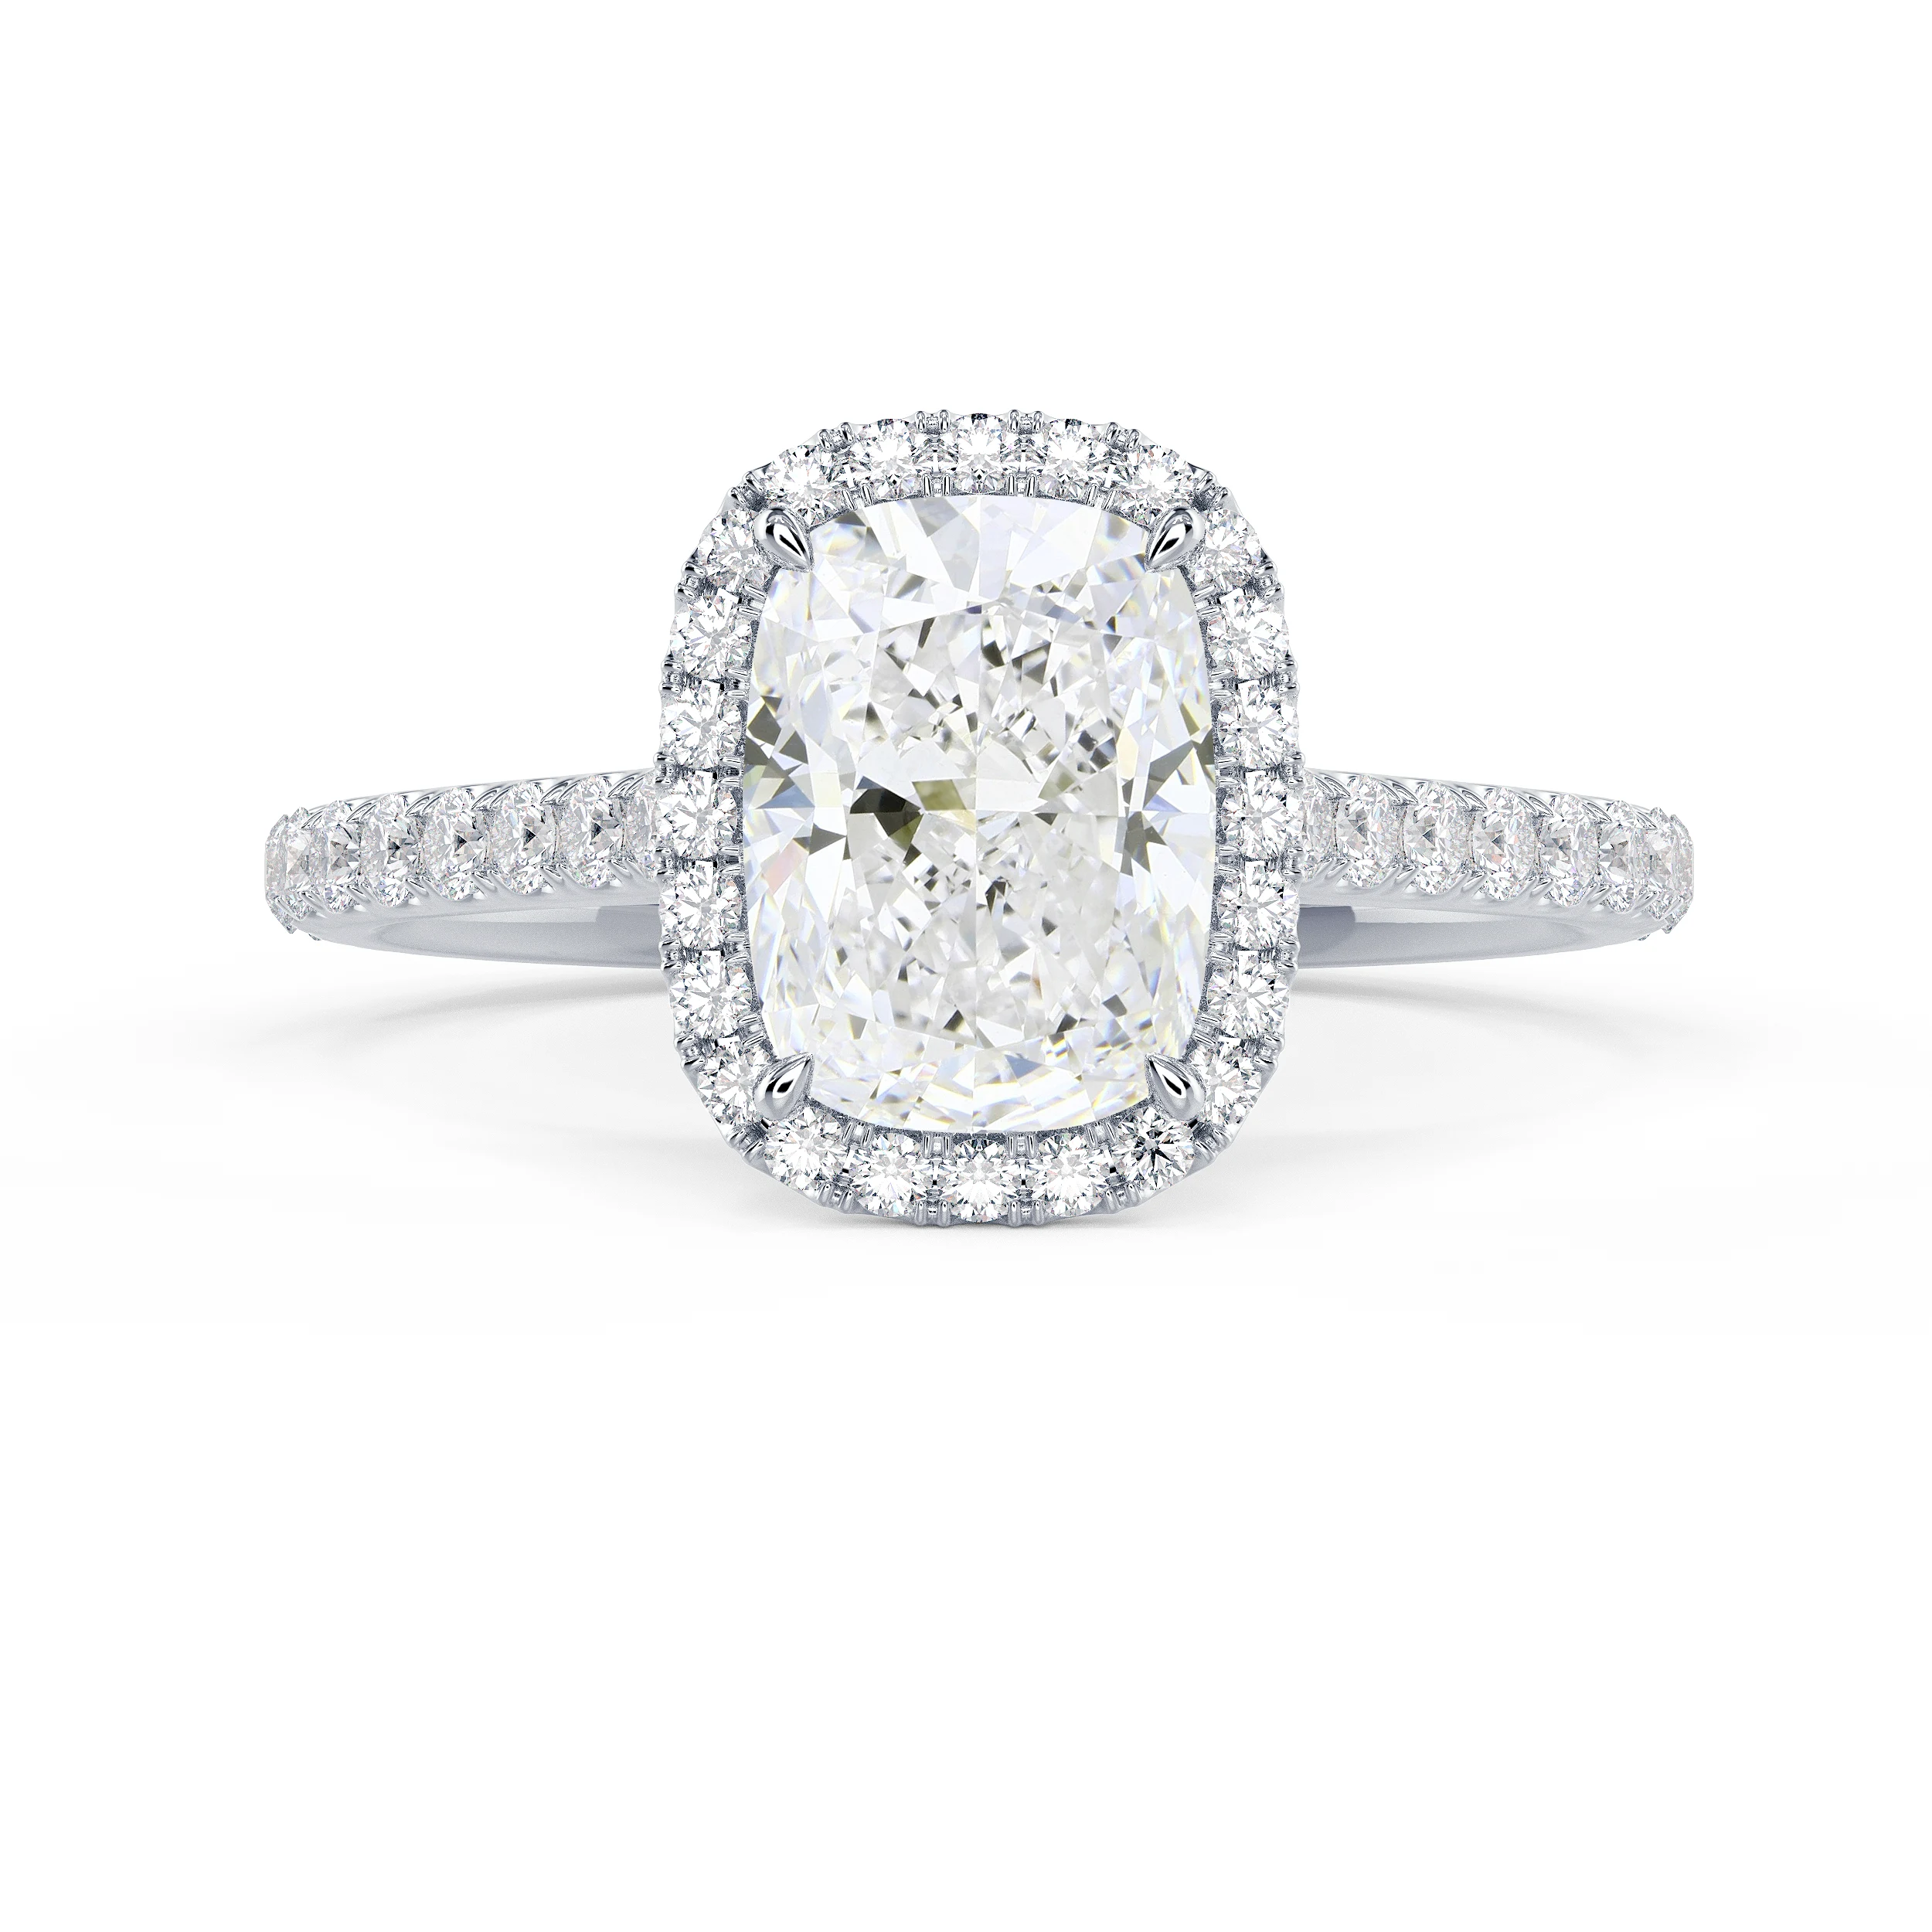 White Gold Cushion Halo Pavé Setting featuring Exceptional Quality Diamonds (Main View)